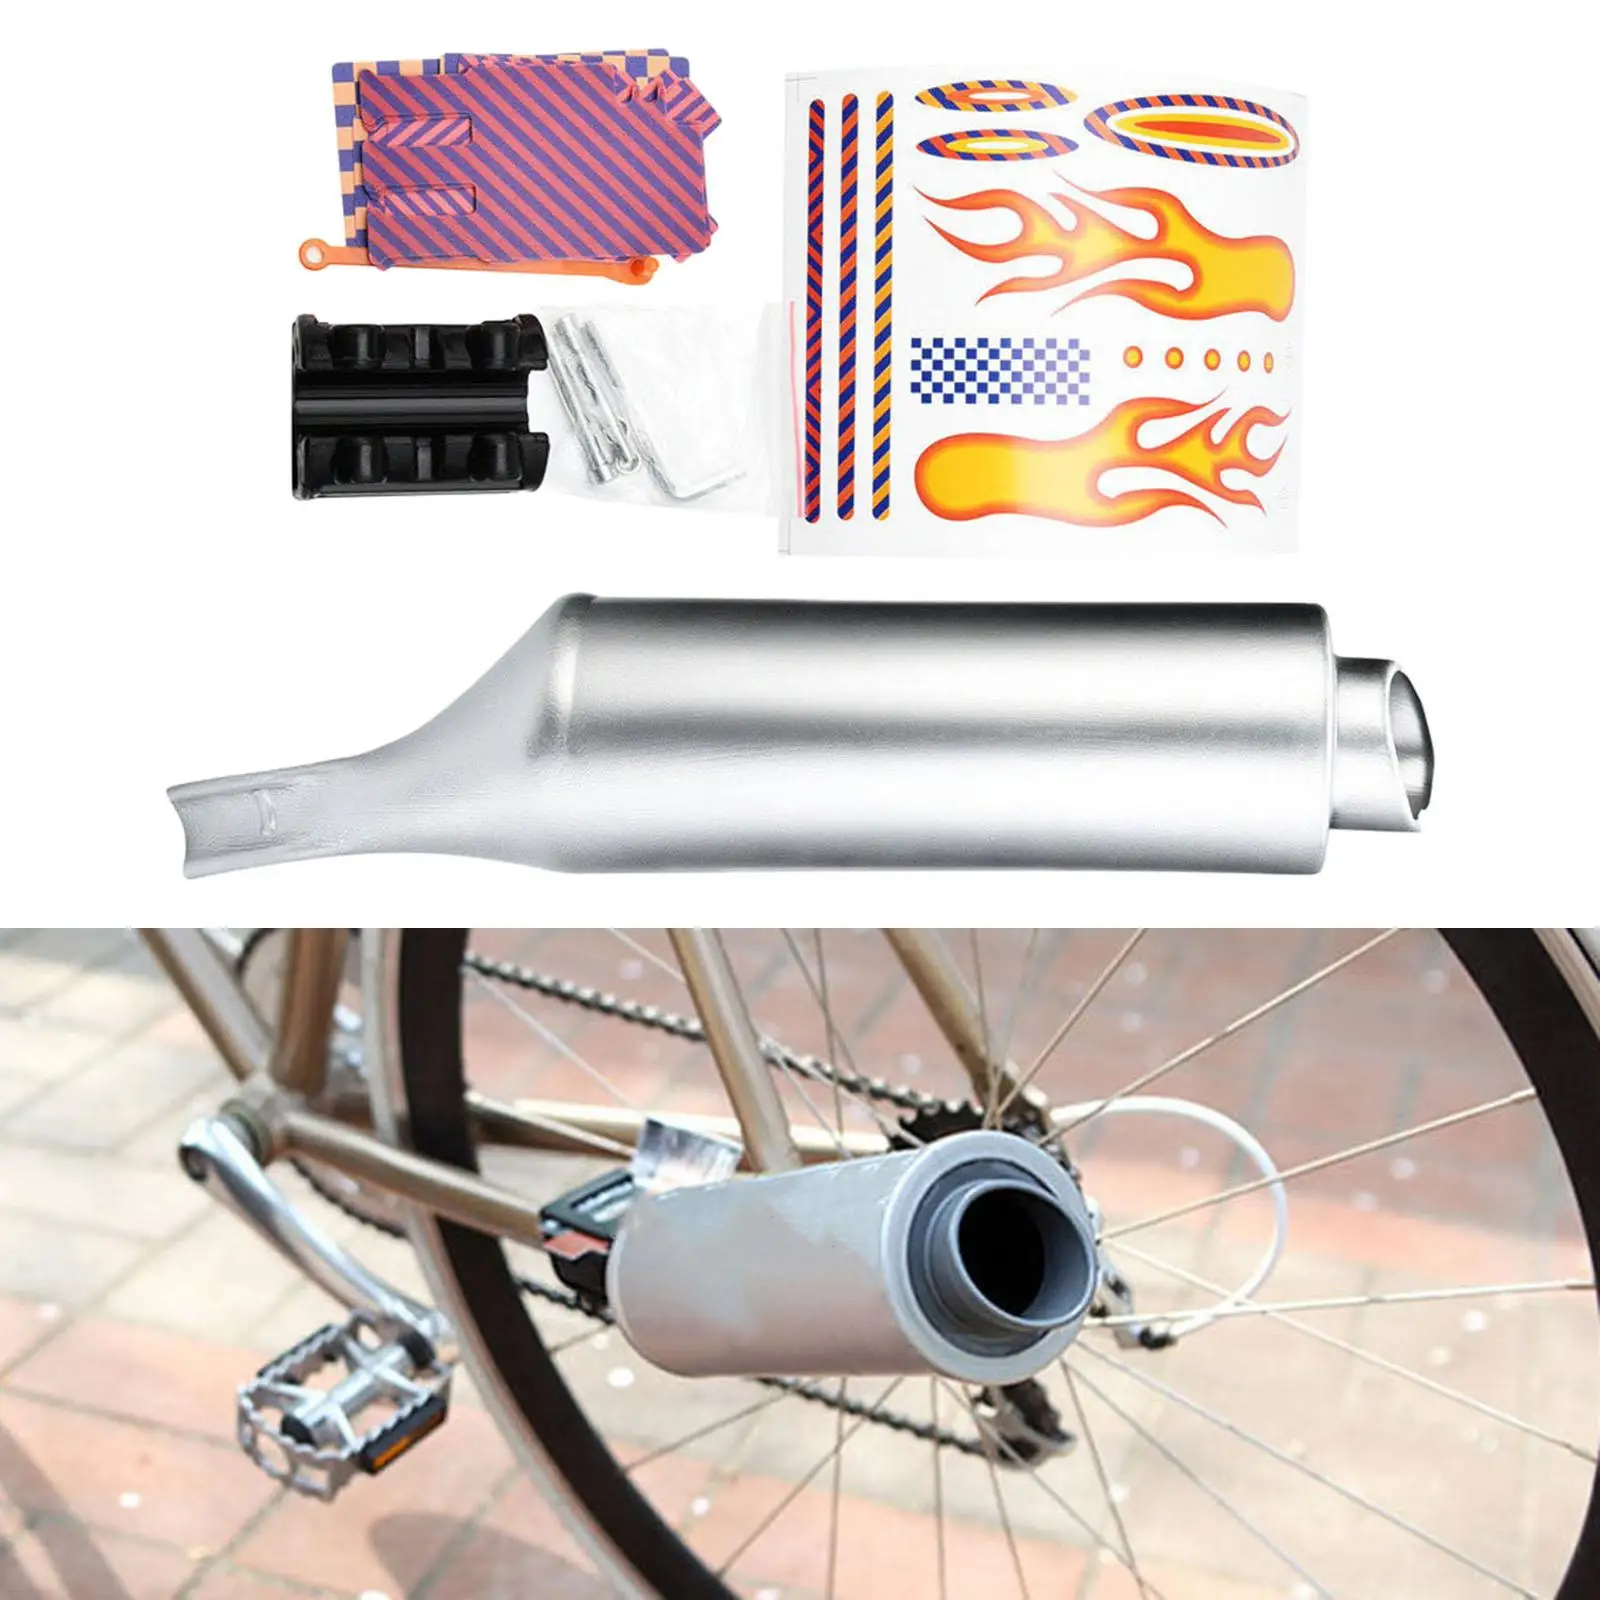 Rehomy Bike Turbo Pipe Exhaust System Bicycle Spoke Sound Maker Motocards Kit 